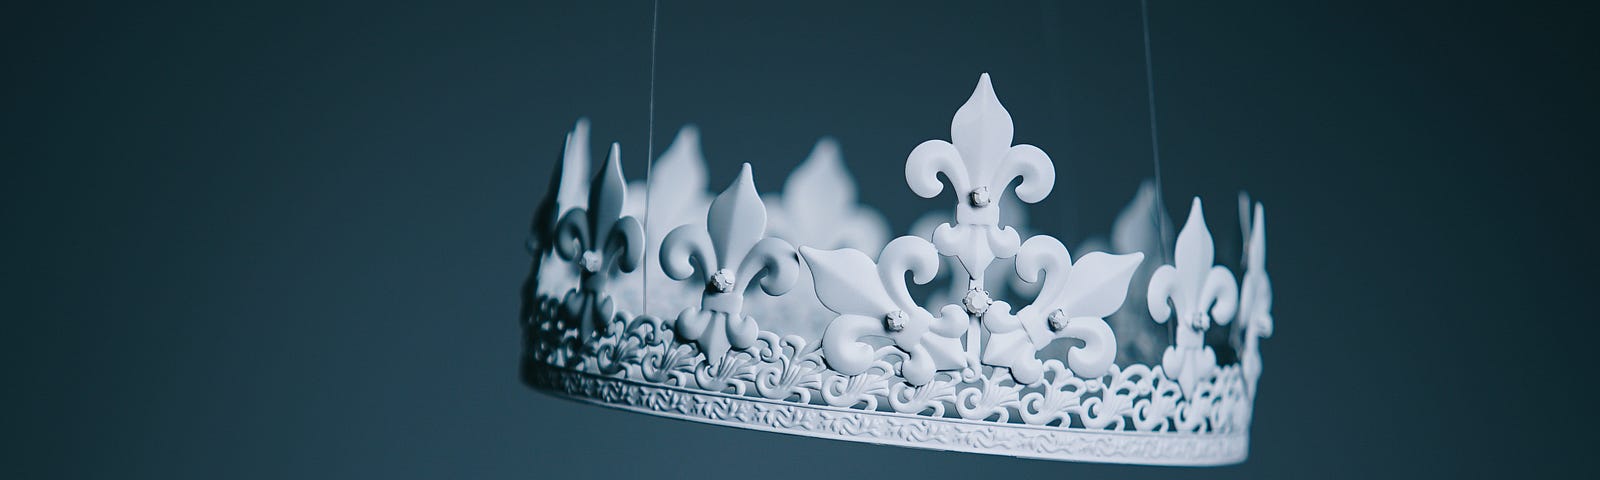 A regal-looking silver crown is suspended in the air by scarcely visible strings